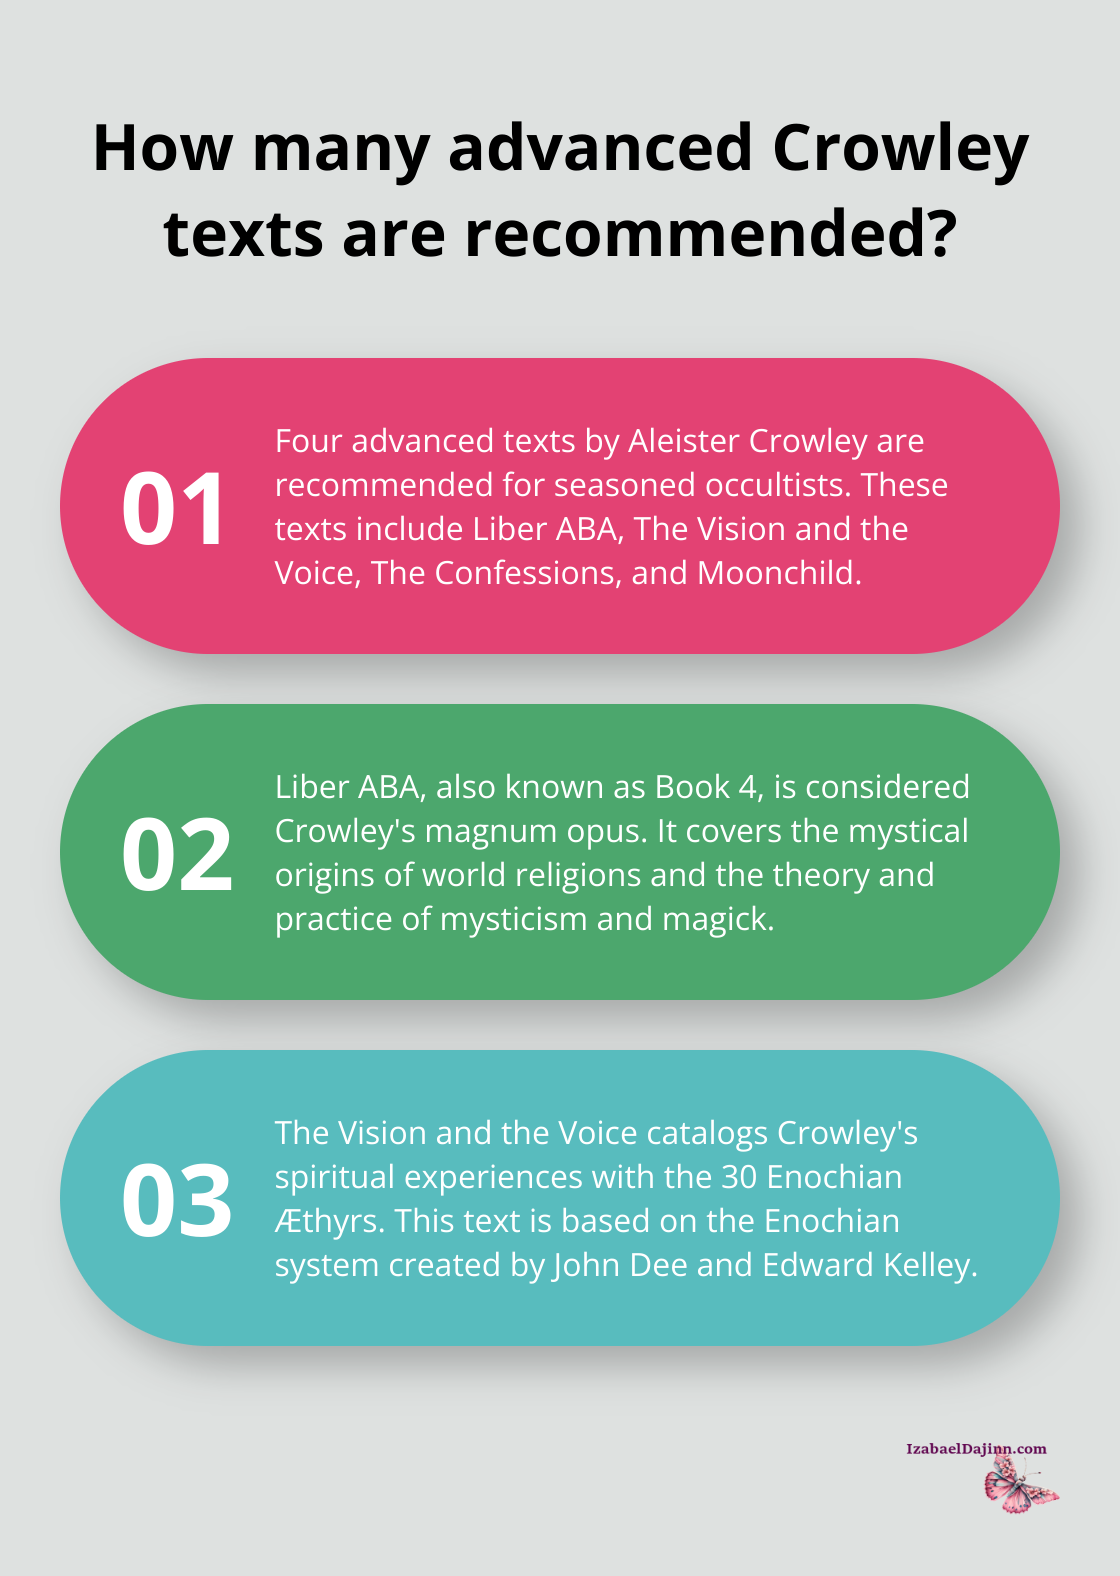 Fact - How many advanced Crowley texts are recommended?